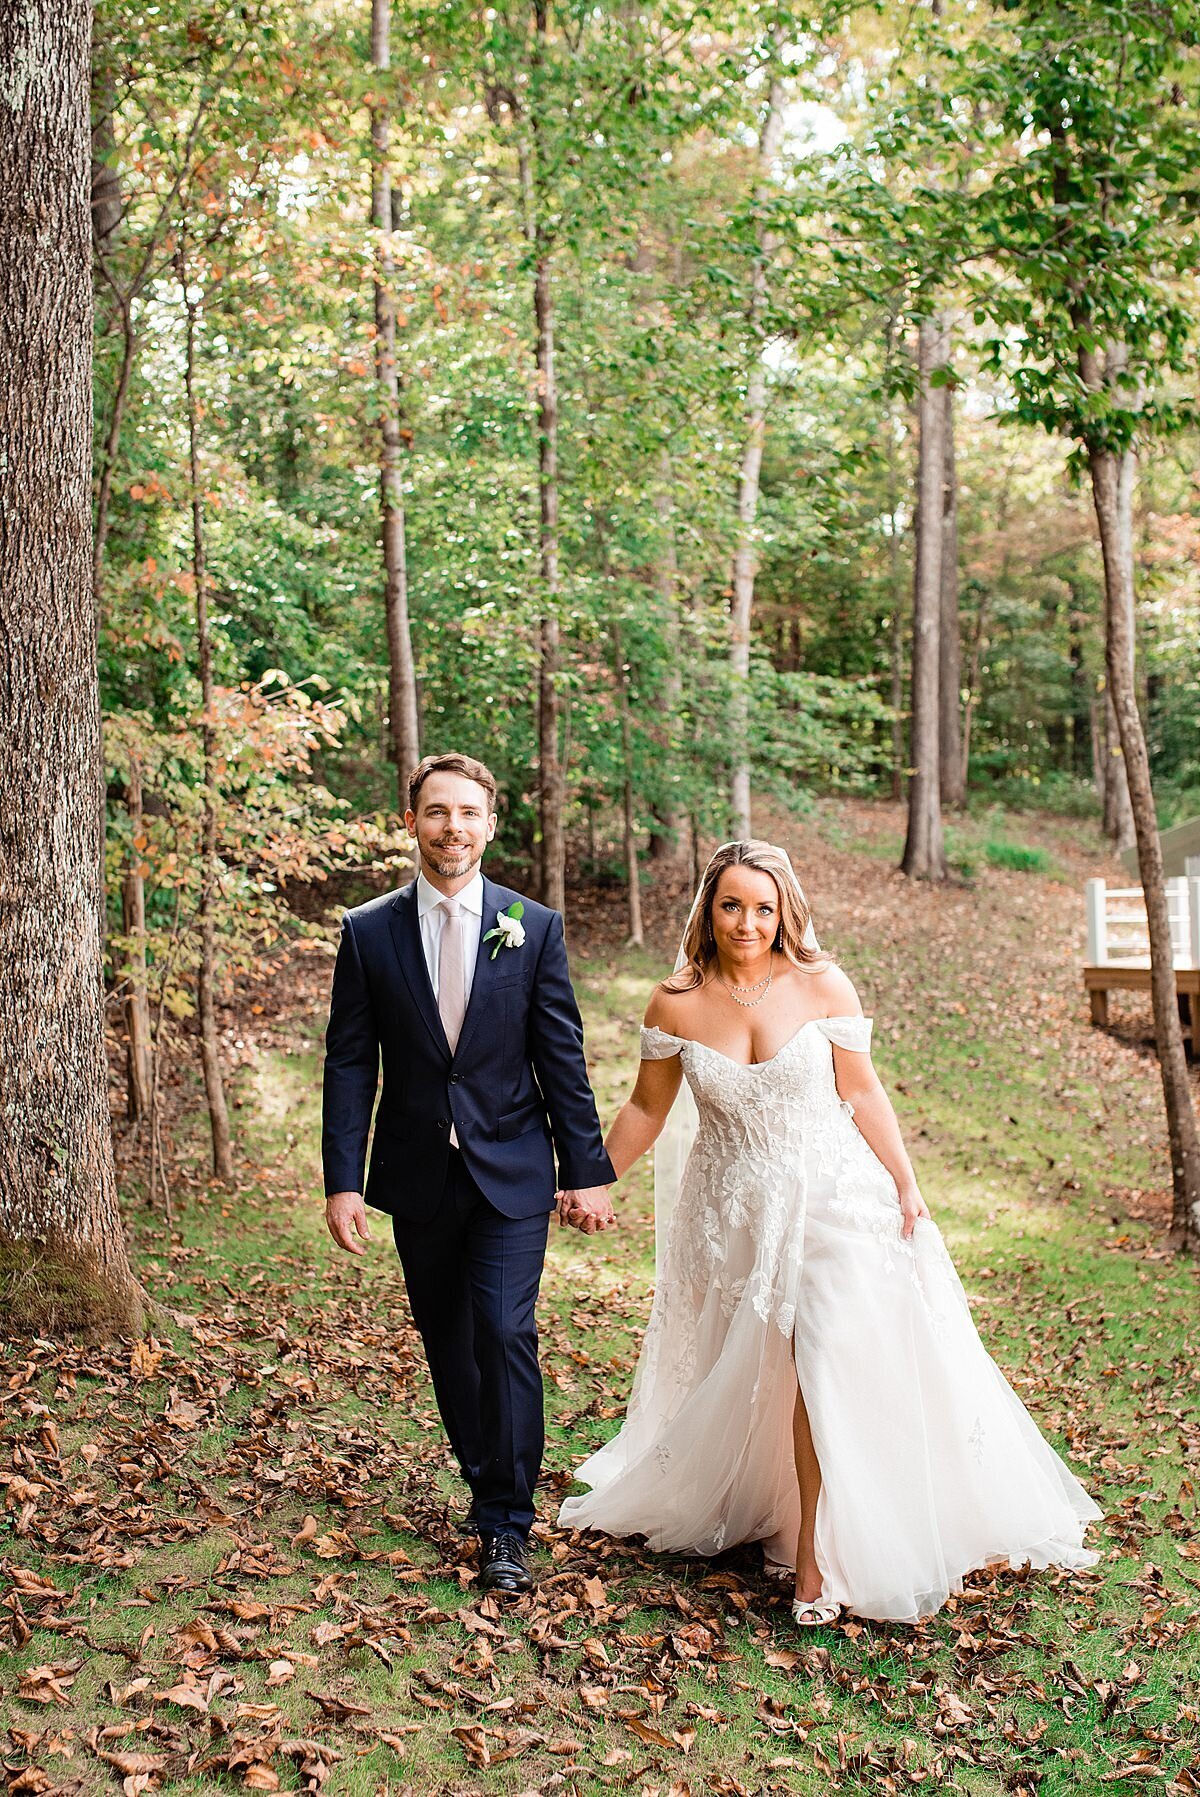 Couple walking hand and hand outside after ceremony with fall foliage around them